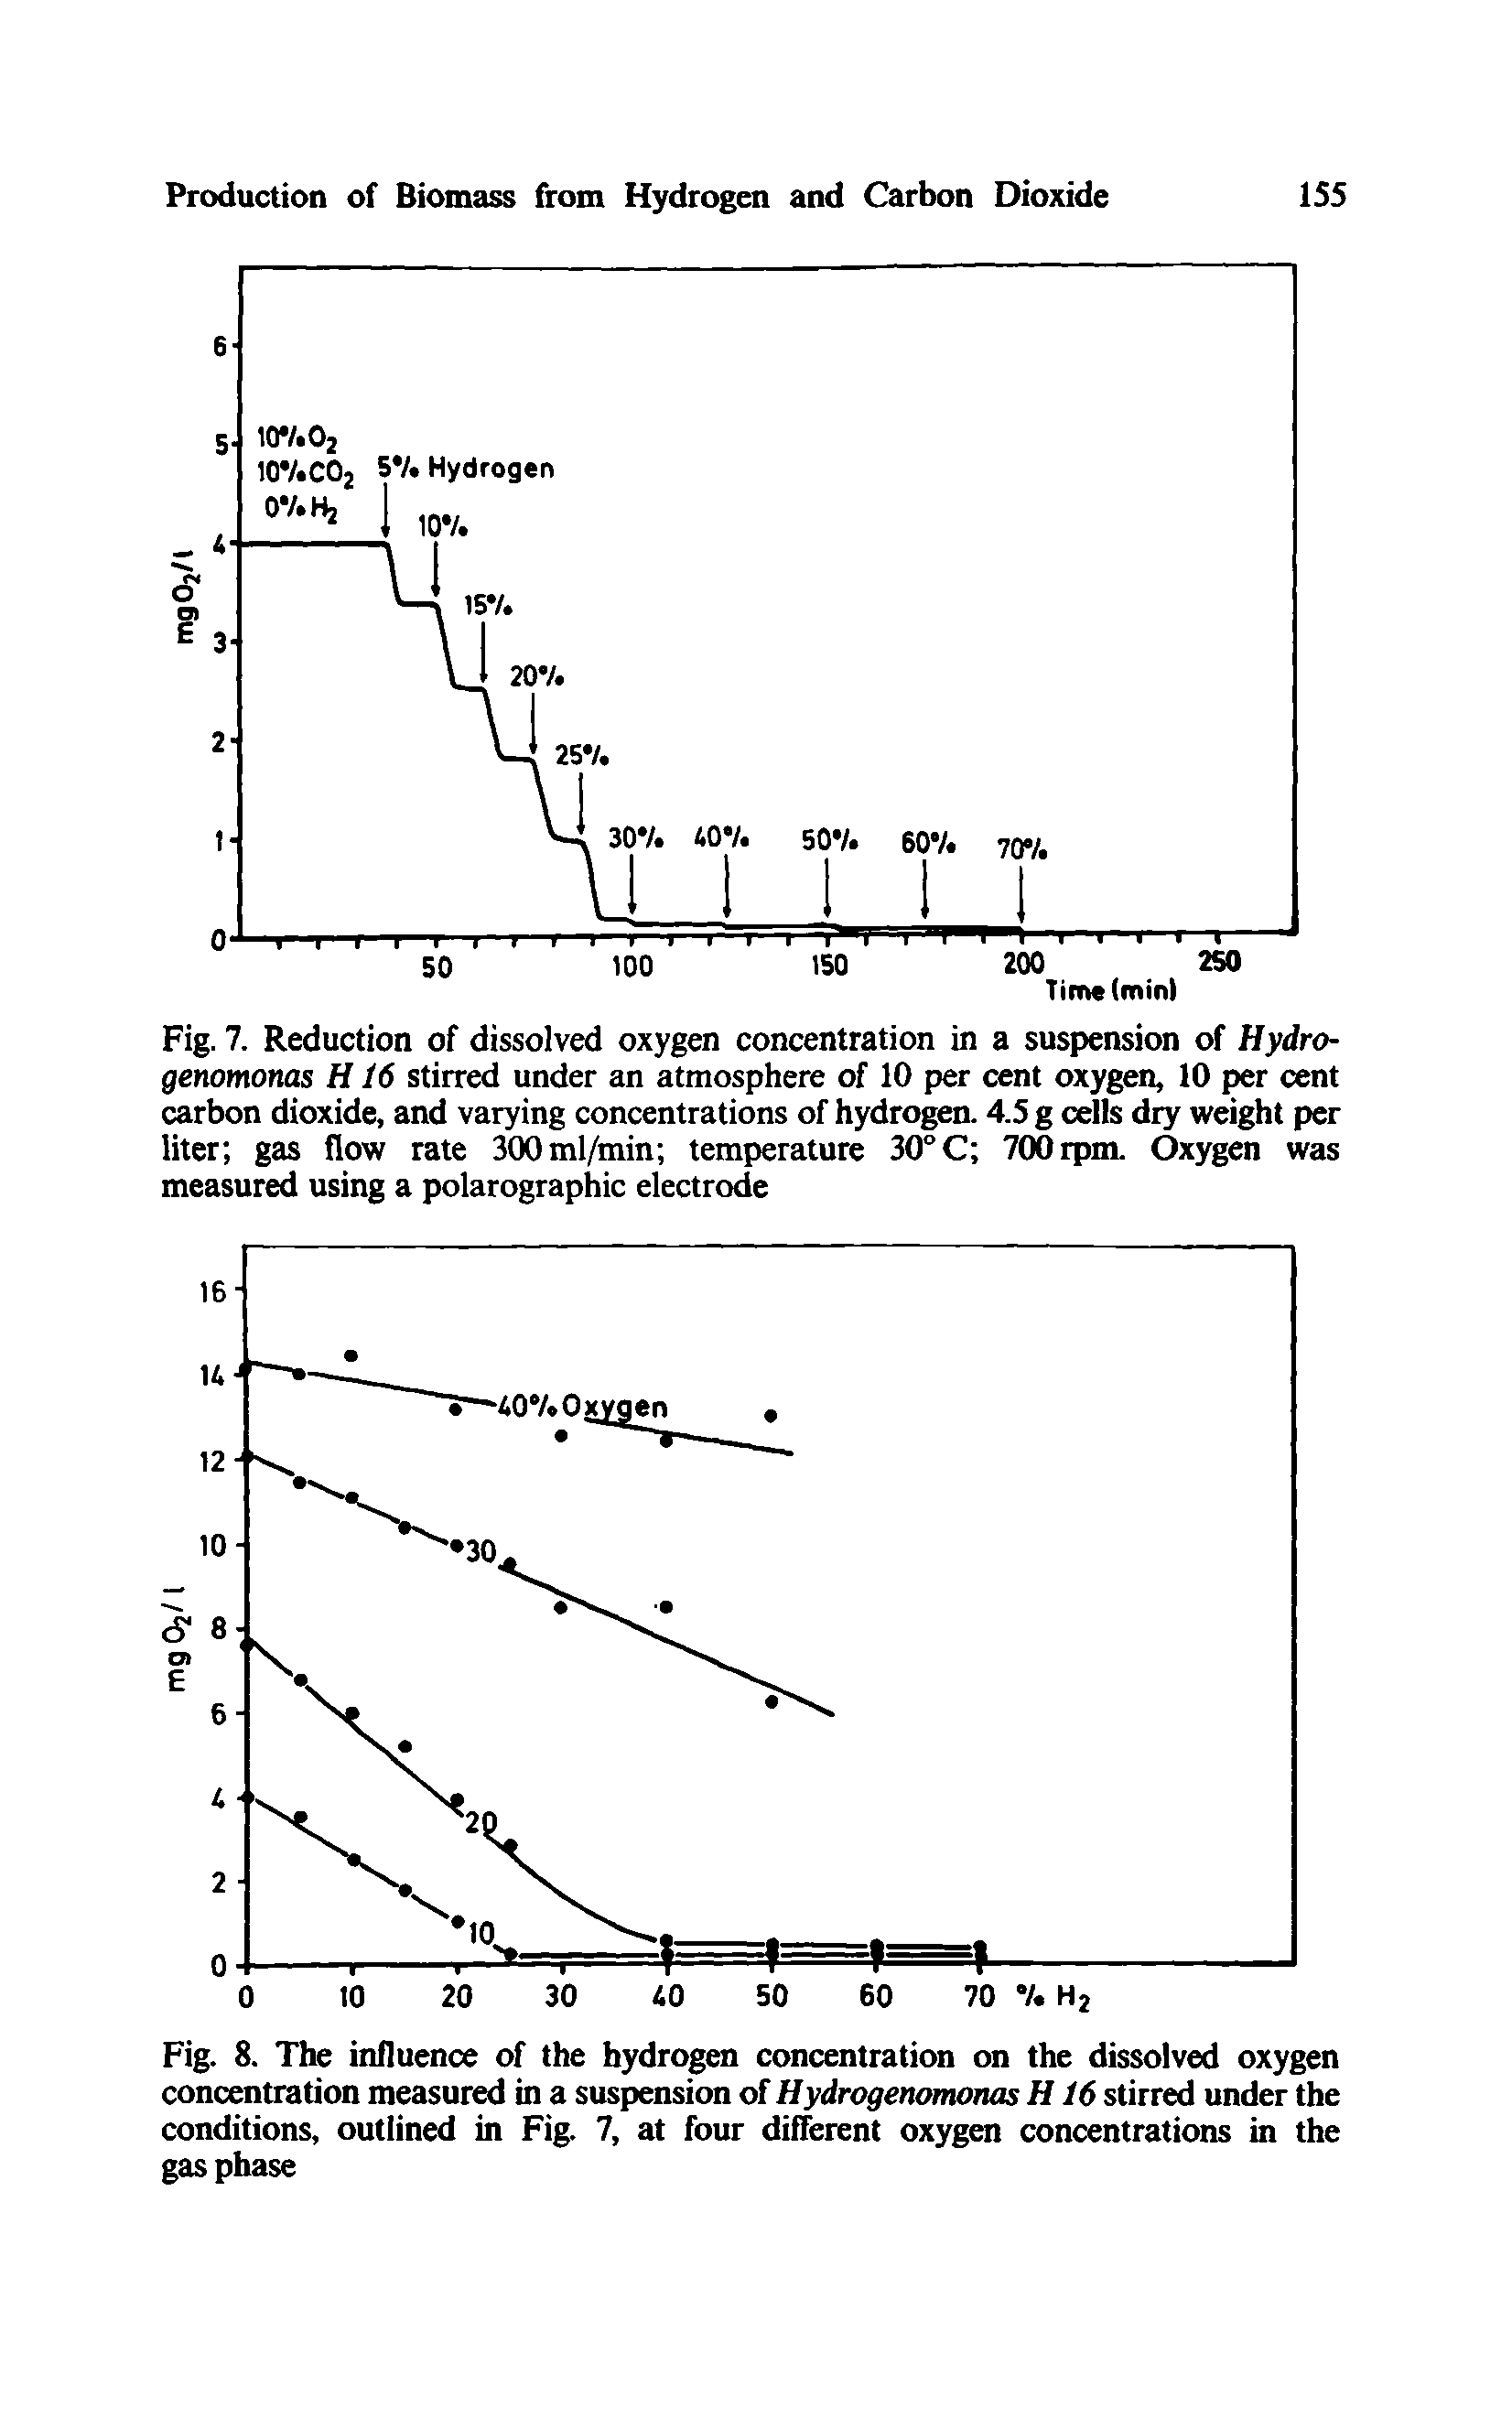 Fig. 7. Reduction of dissolved oxygen concentration in a suspension of Hydro-genomonas H16 stirred under an atmosphere of 10 per cent oxygen, 10 per cent carbon dioxide, and varying concentrations of hydrogea 4.5 g cells dry weight per liter gas flow rate 300ml/min temperature 30°C 700rpm. Oxygen was measured using a polarographic electrode...